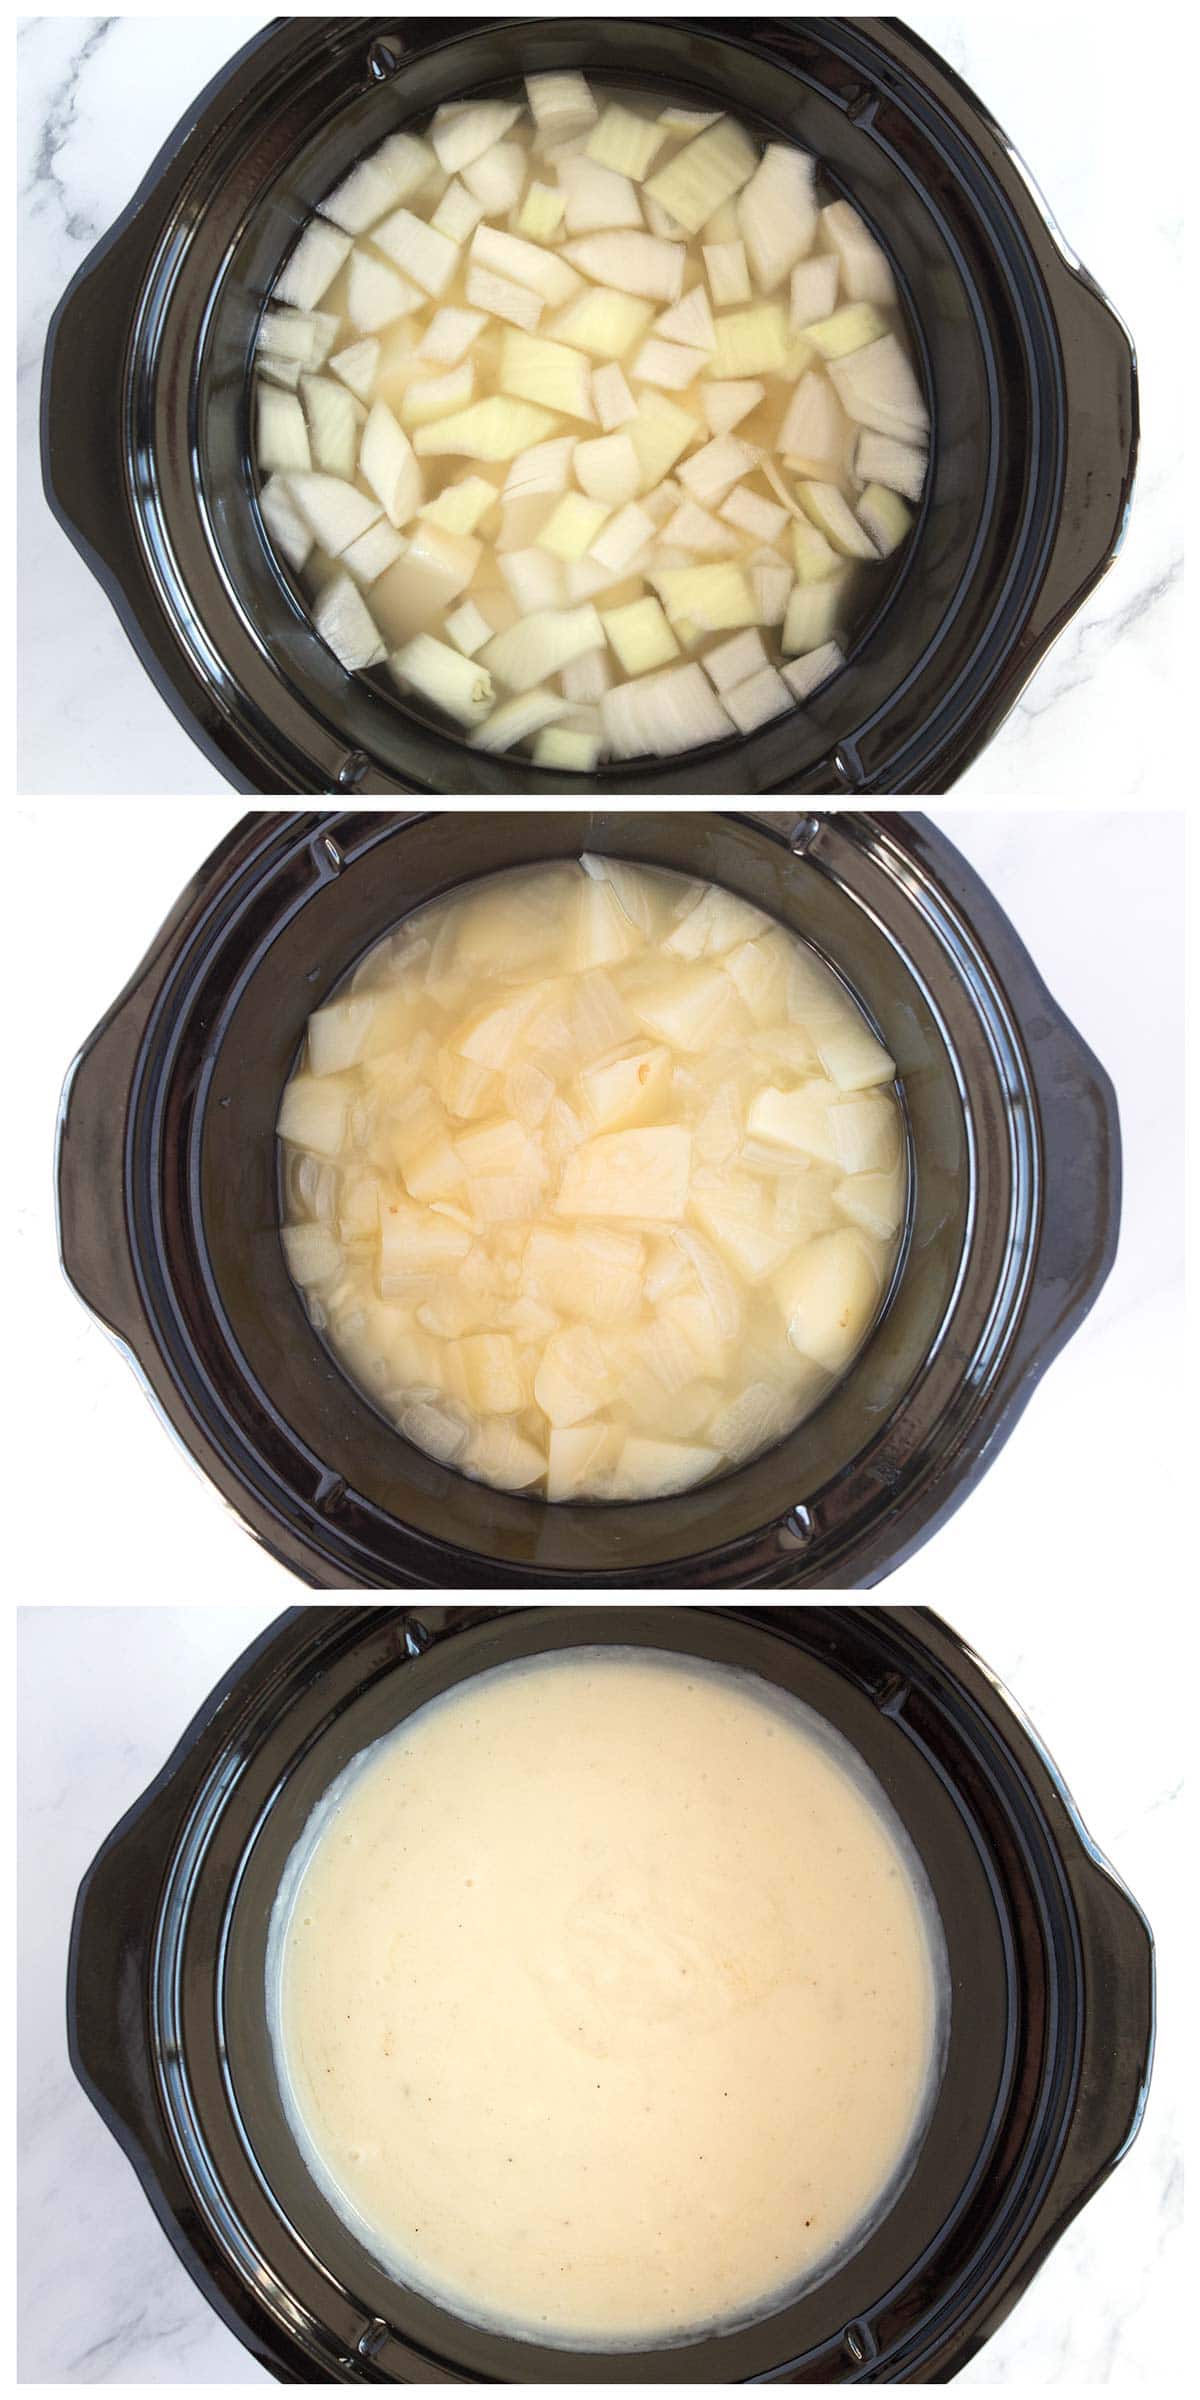 Instructions on how to make potato soup in a crock pot.